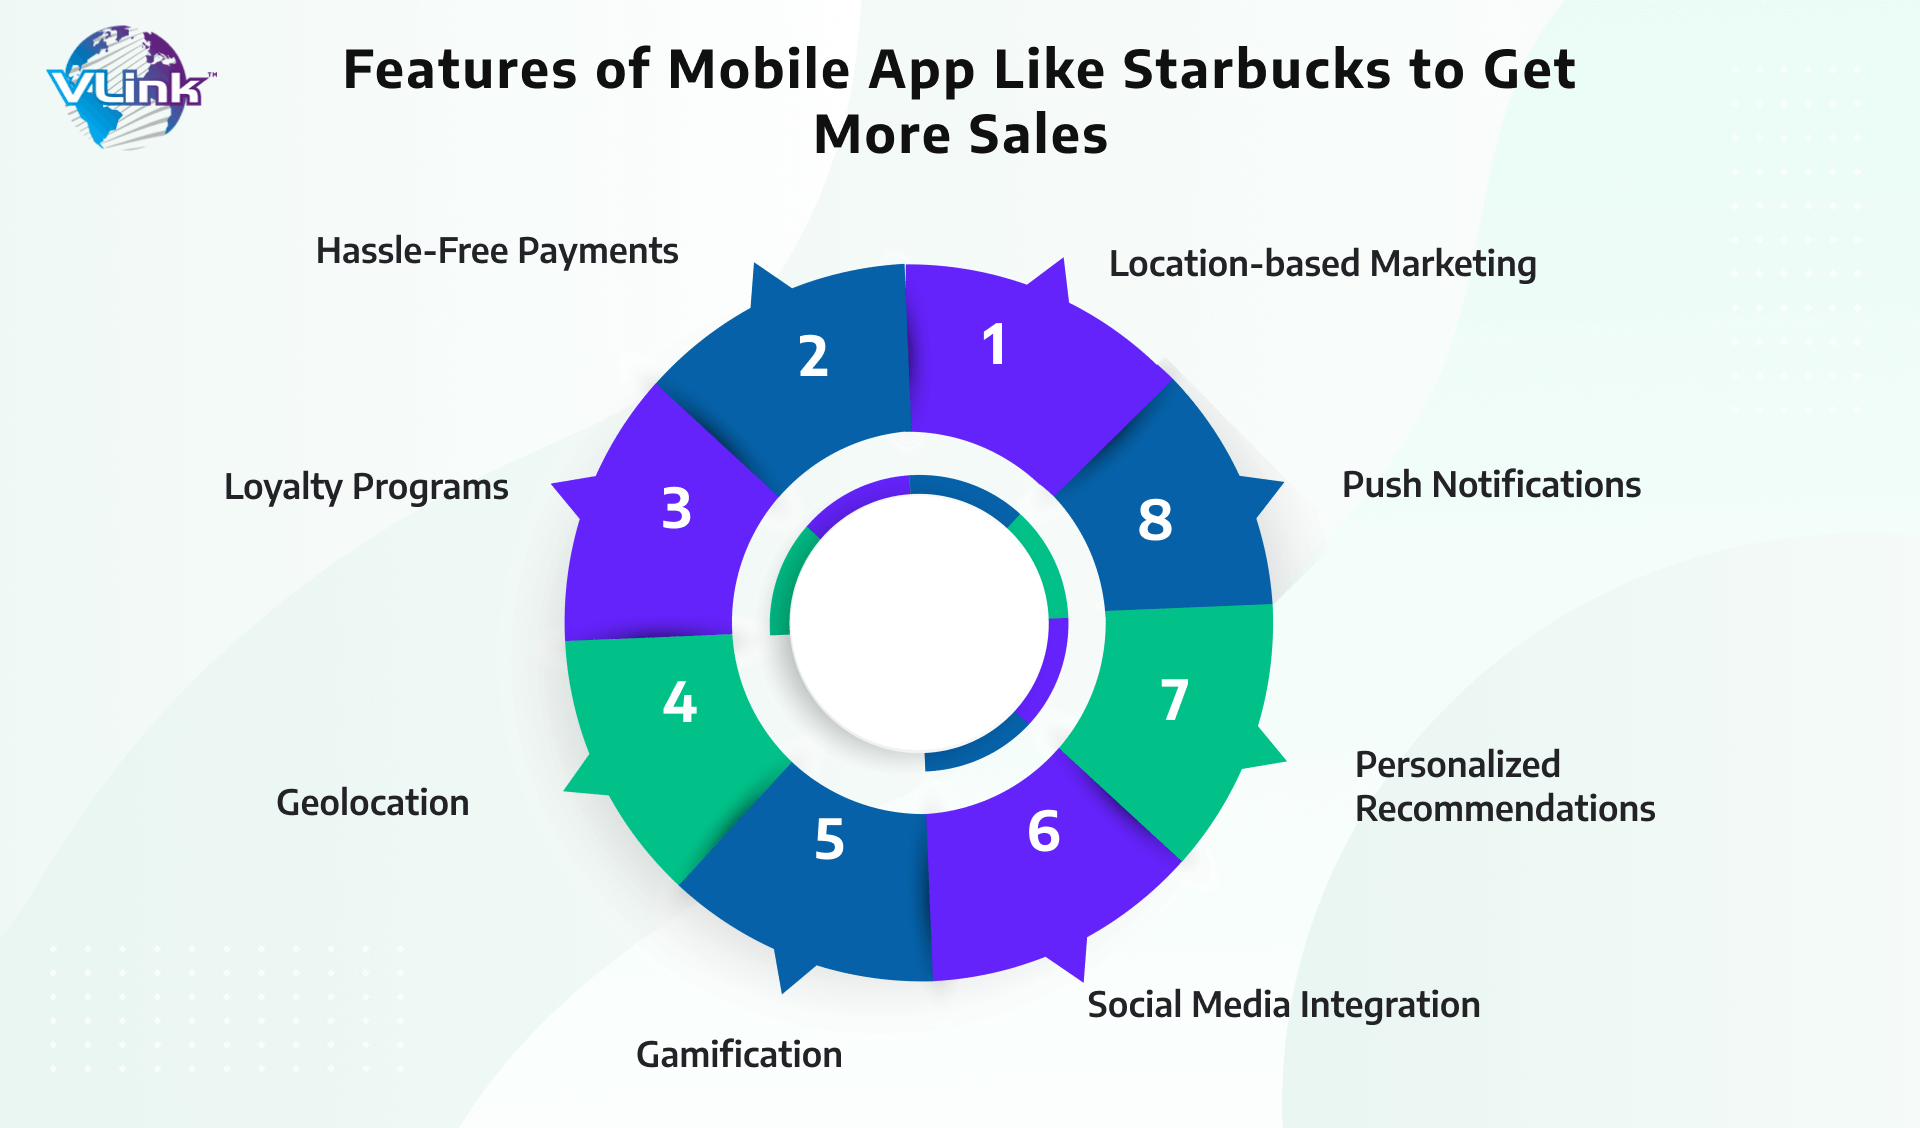 Mobile App Like Starbucks Features to Increase Sales